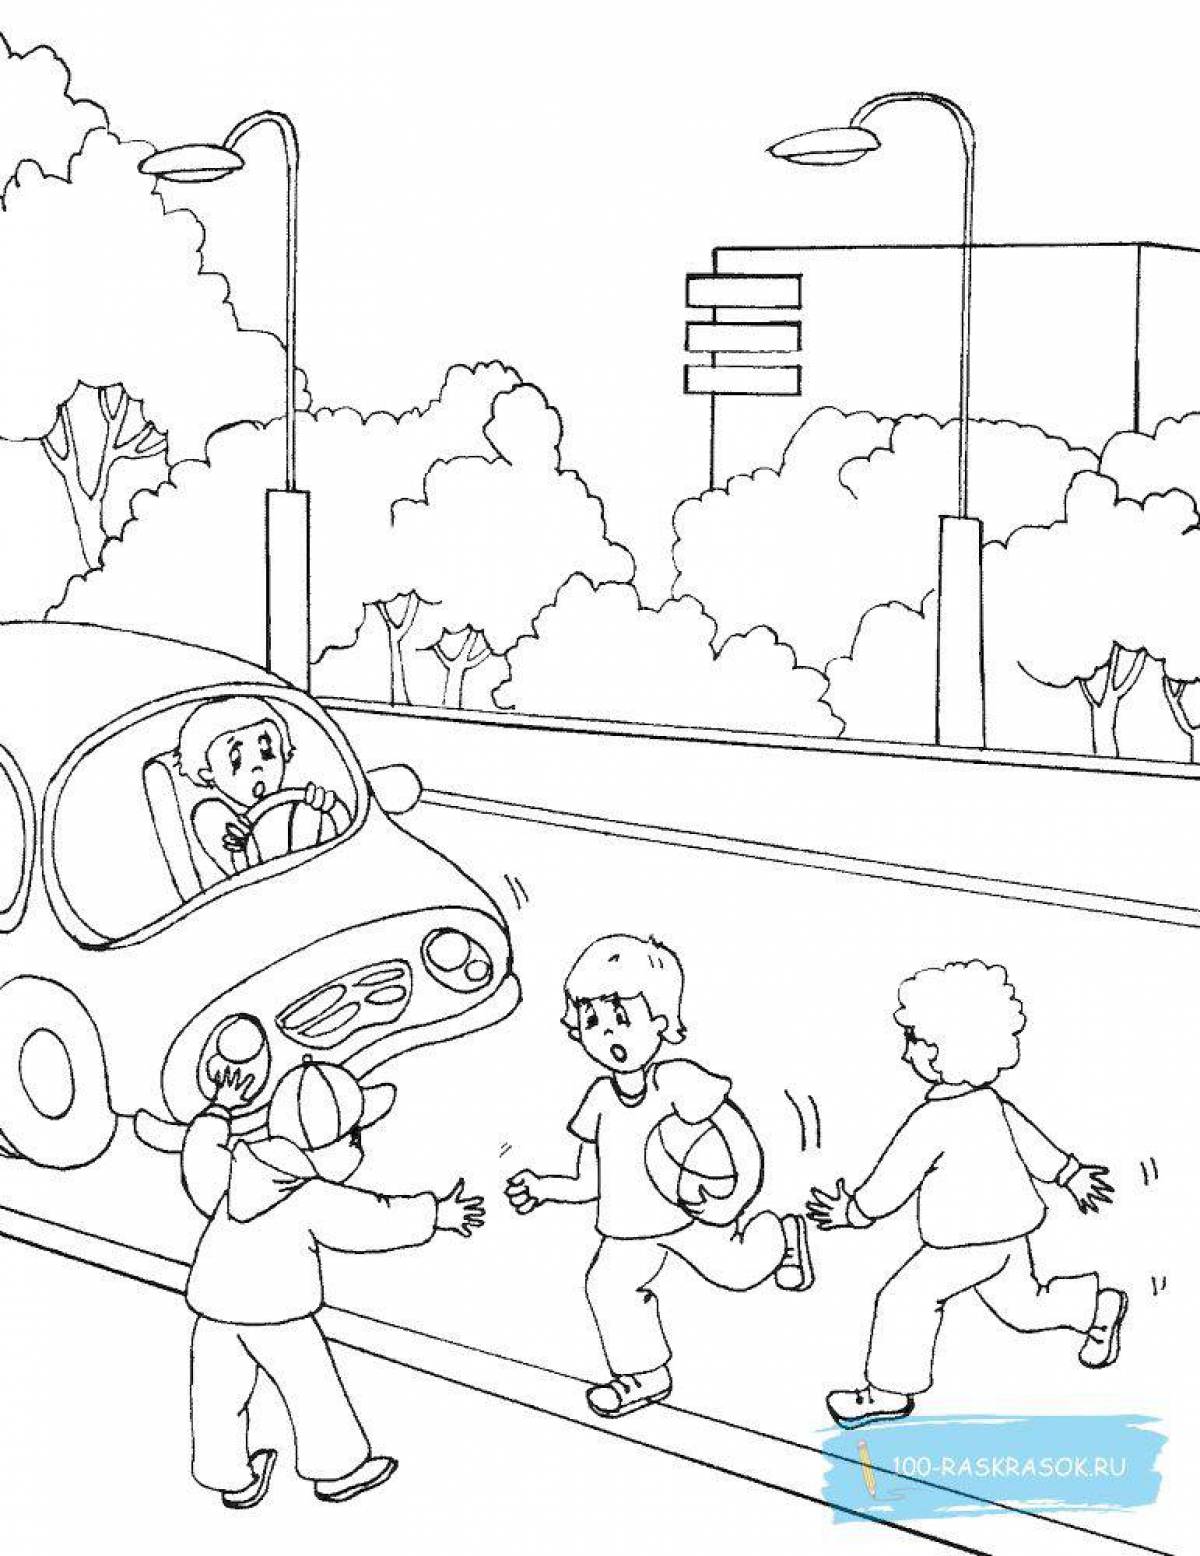 Playful traffic rules coloring page for teens